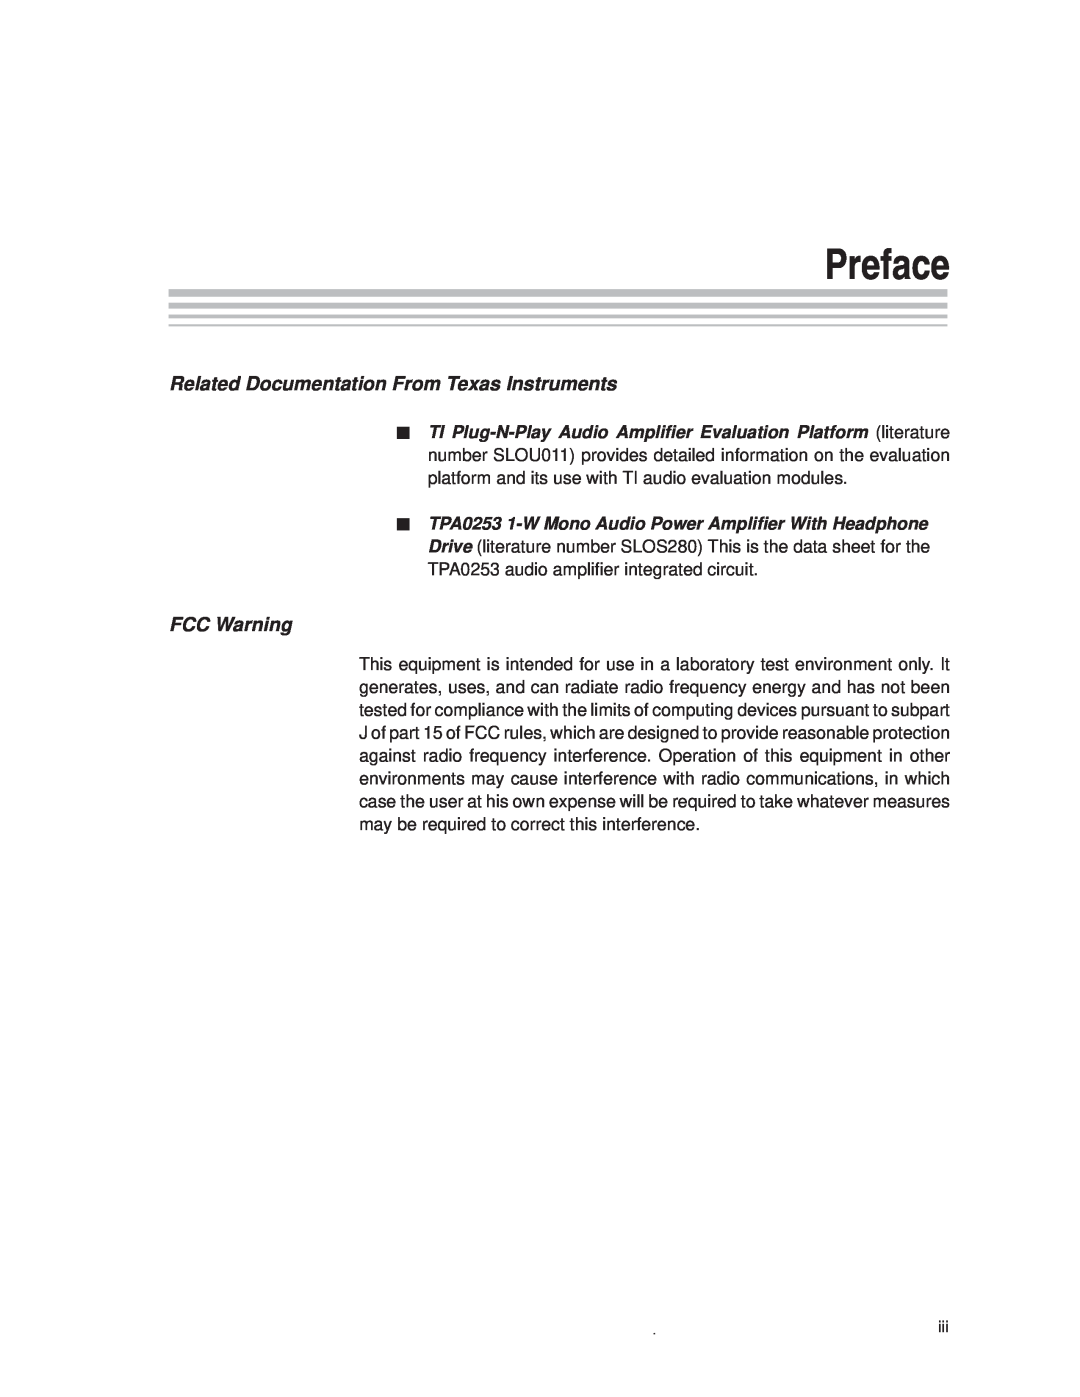 Texas Instruments TPA0253 manual Preface, Related Documentation From Texas Instruments, FCC Warning 